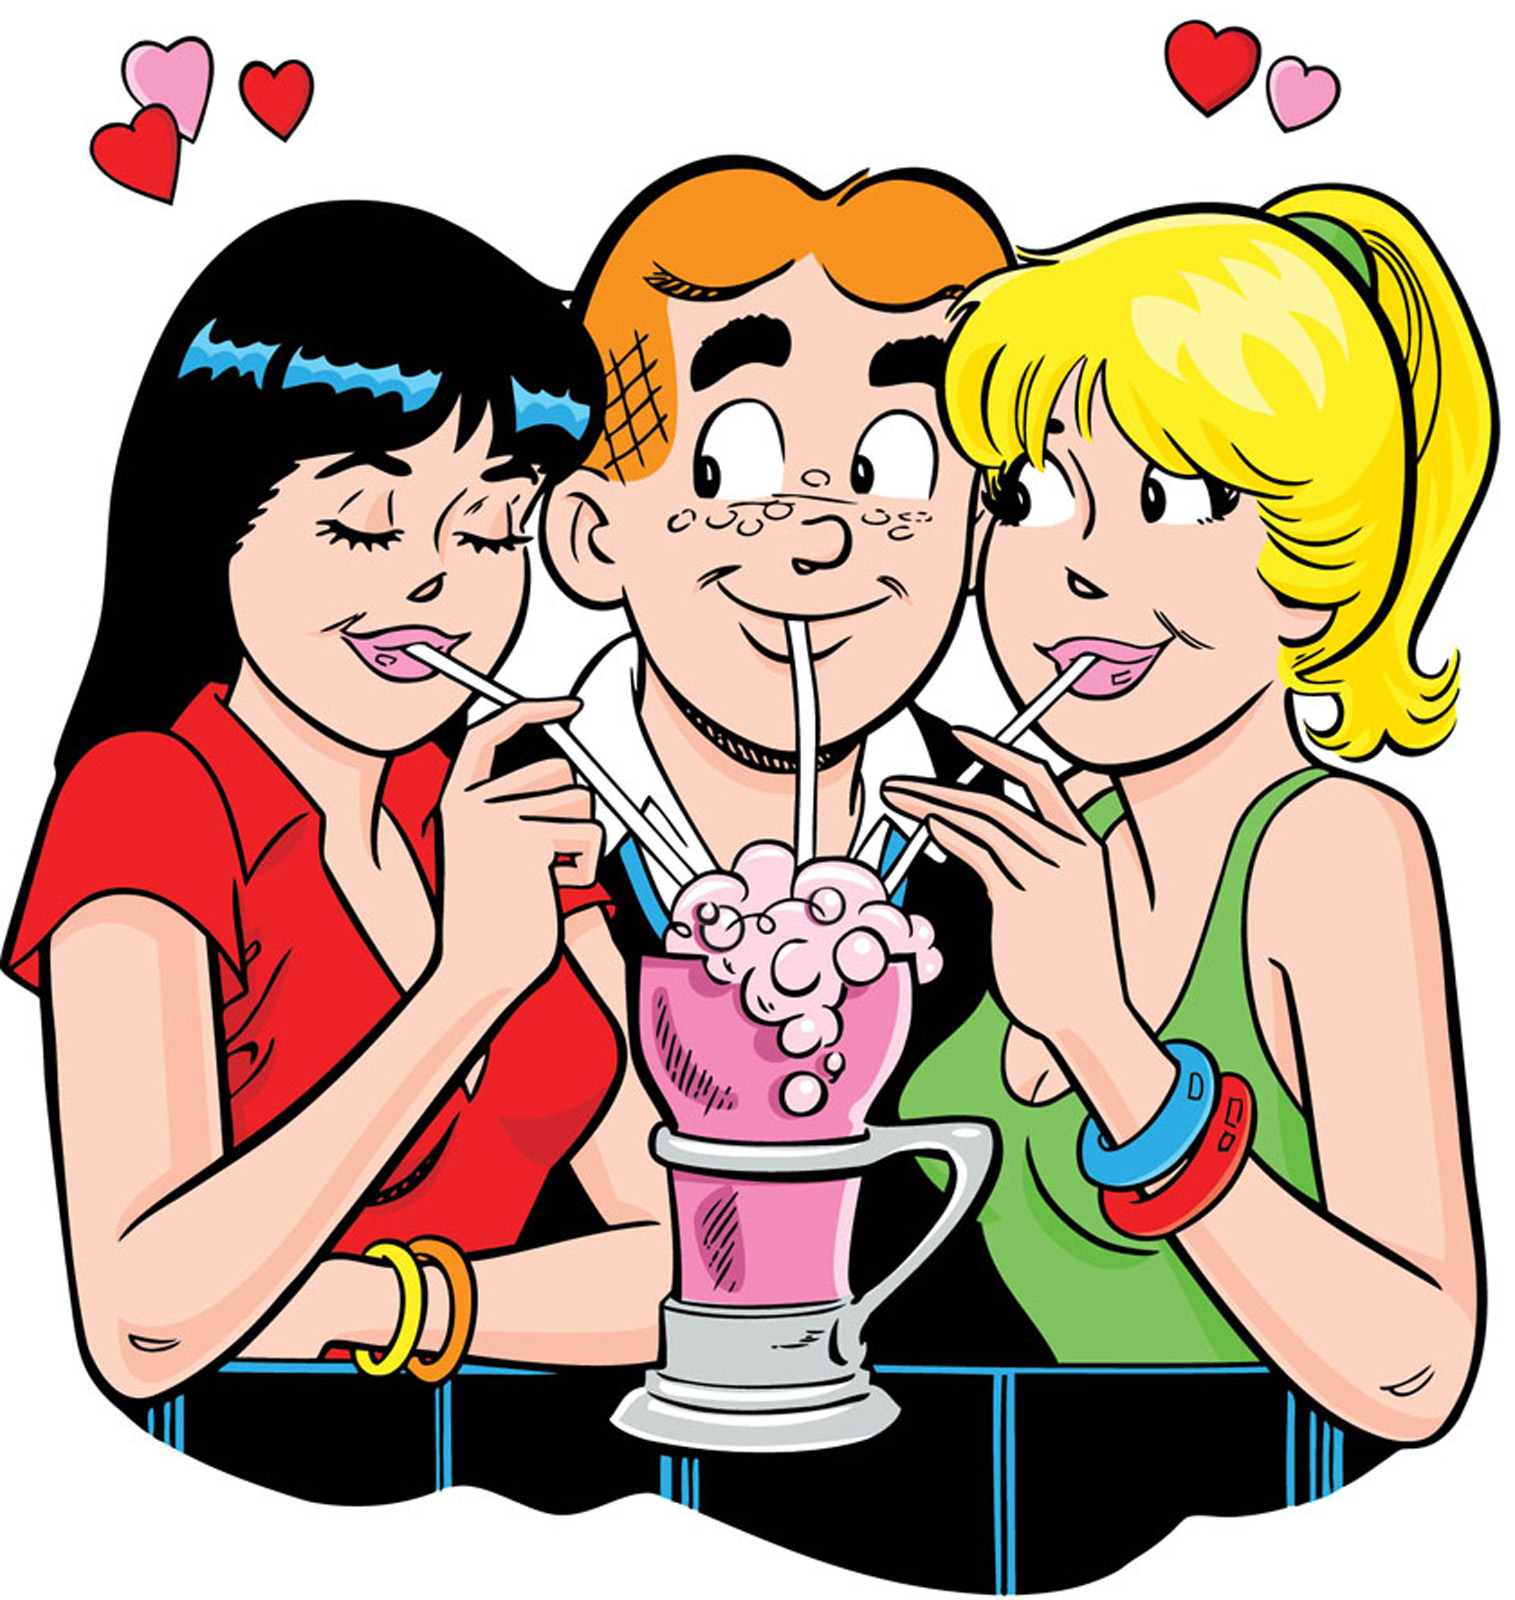 From left: Veronica, Archie, and Betty, characters from the Archie's comic book series. (Archie Comics/AP)